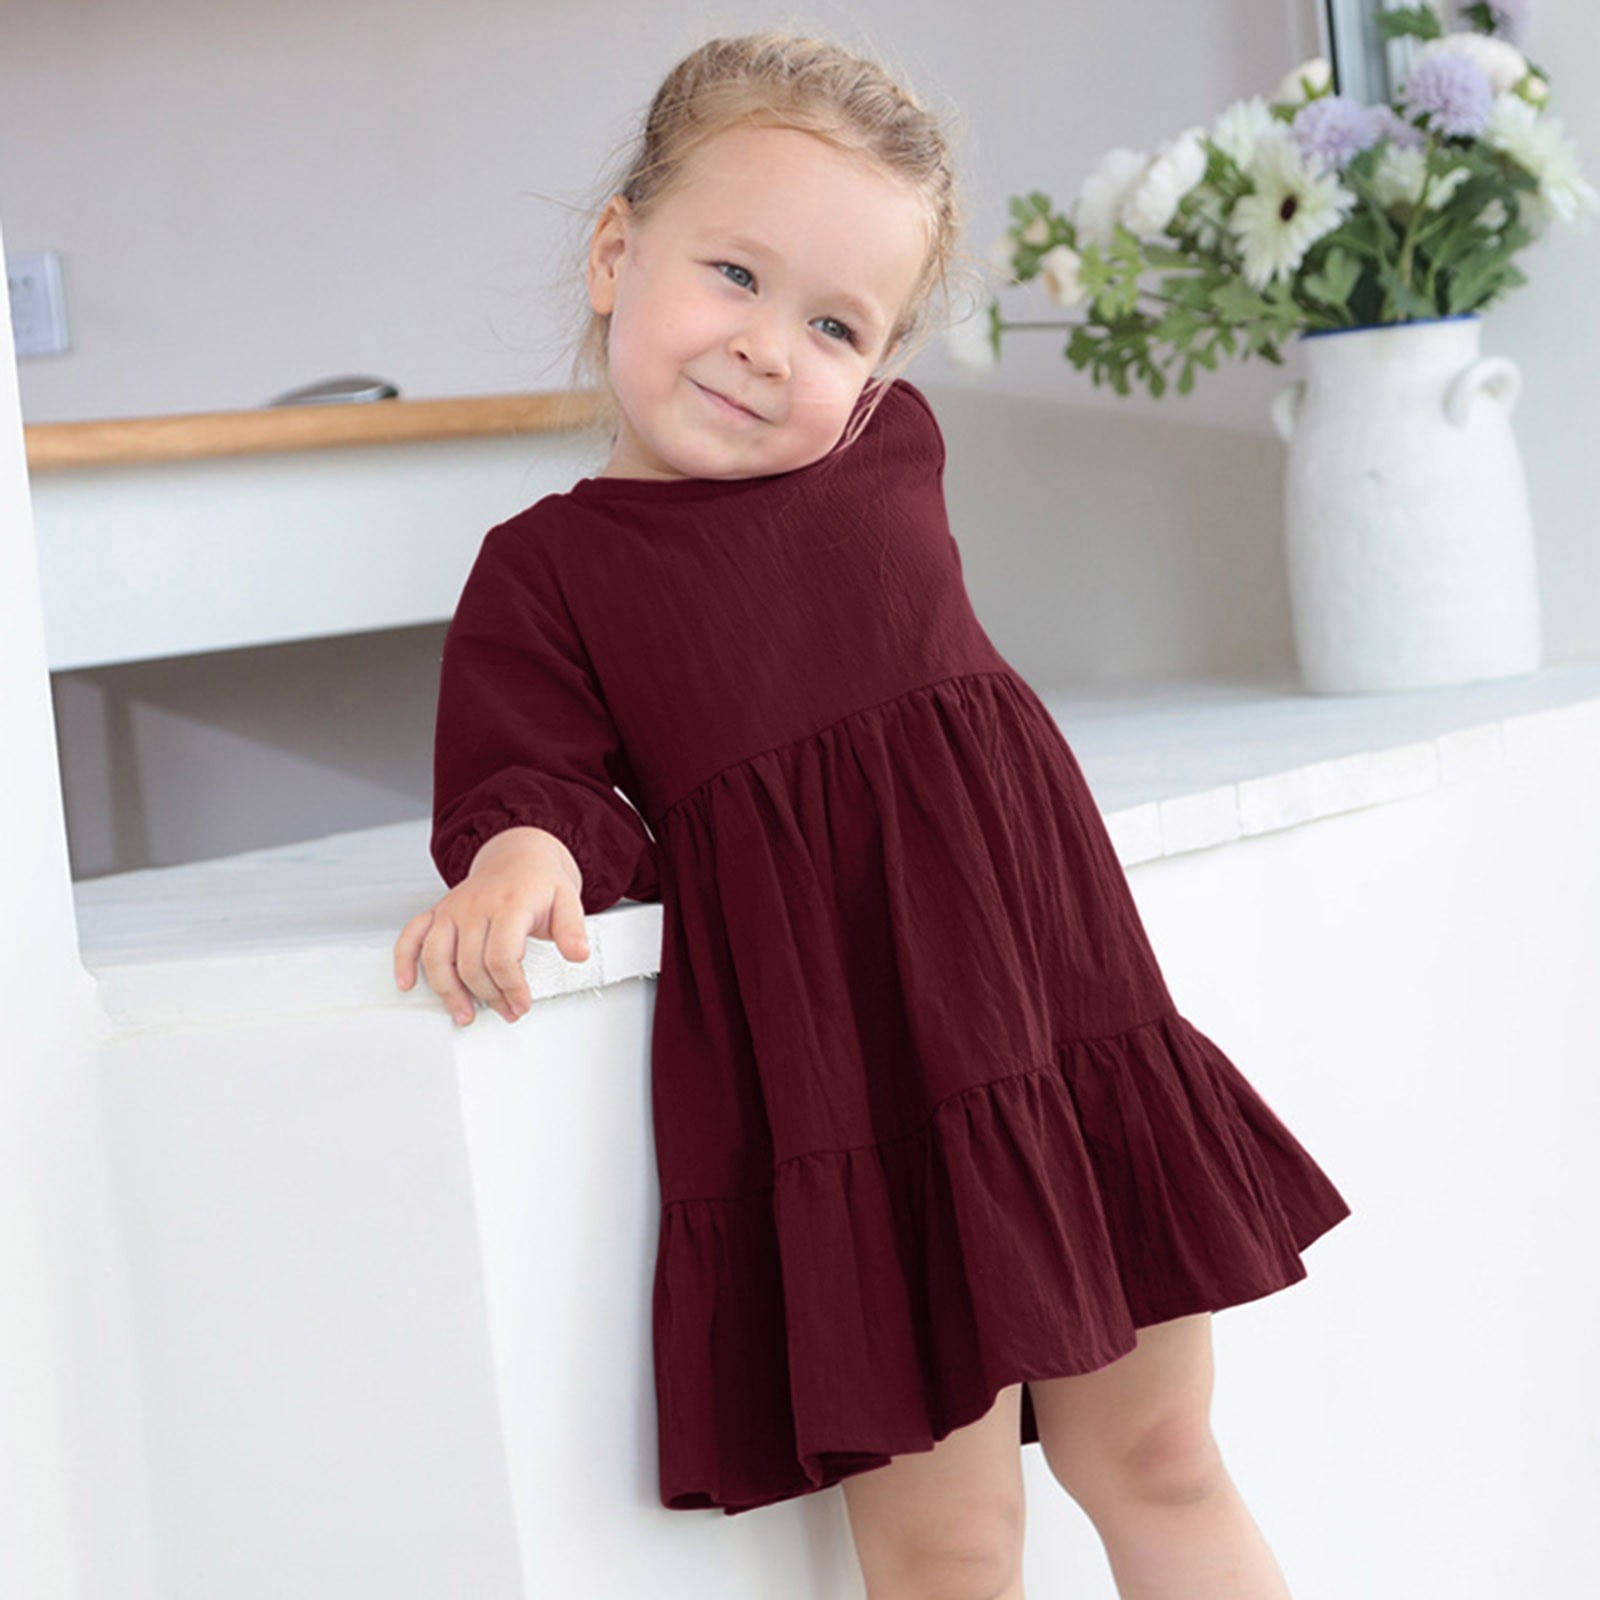 Stunning Baby Girl The Little Party Dress For 1st Birthday, Baptism, And  Christening Available In Sizes 12 18 Months Perfect For Toddlers And  Infants Vestidos 230803 From Cong06, $8.87 | DHgate.Com